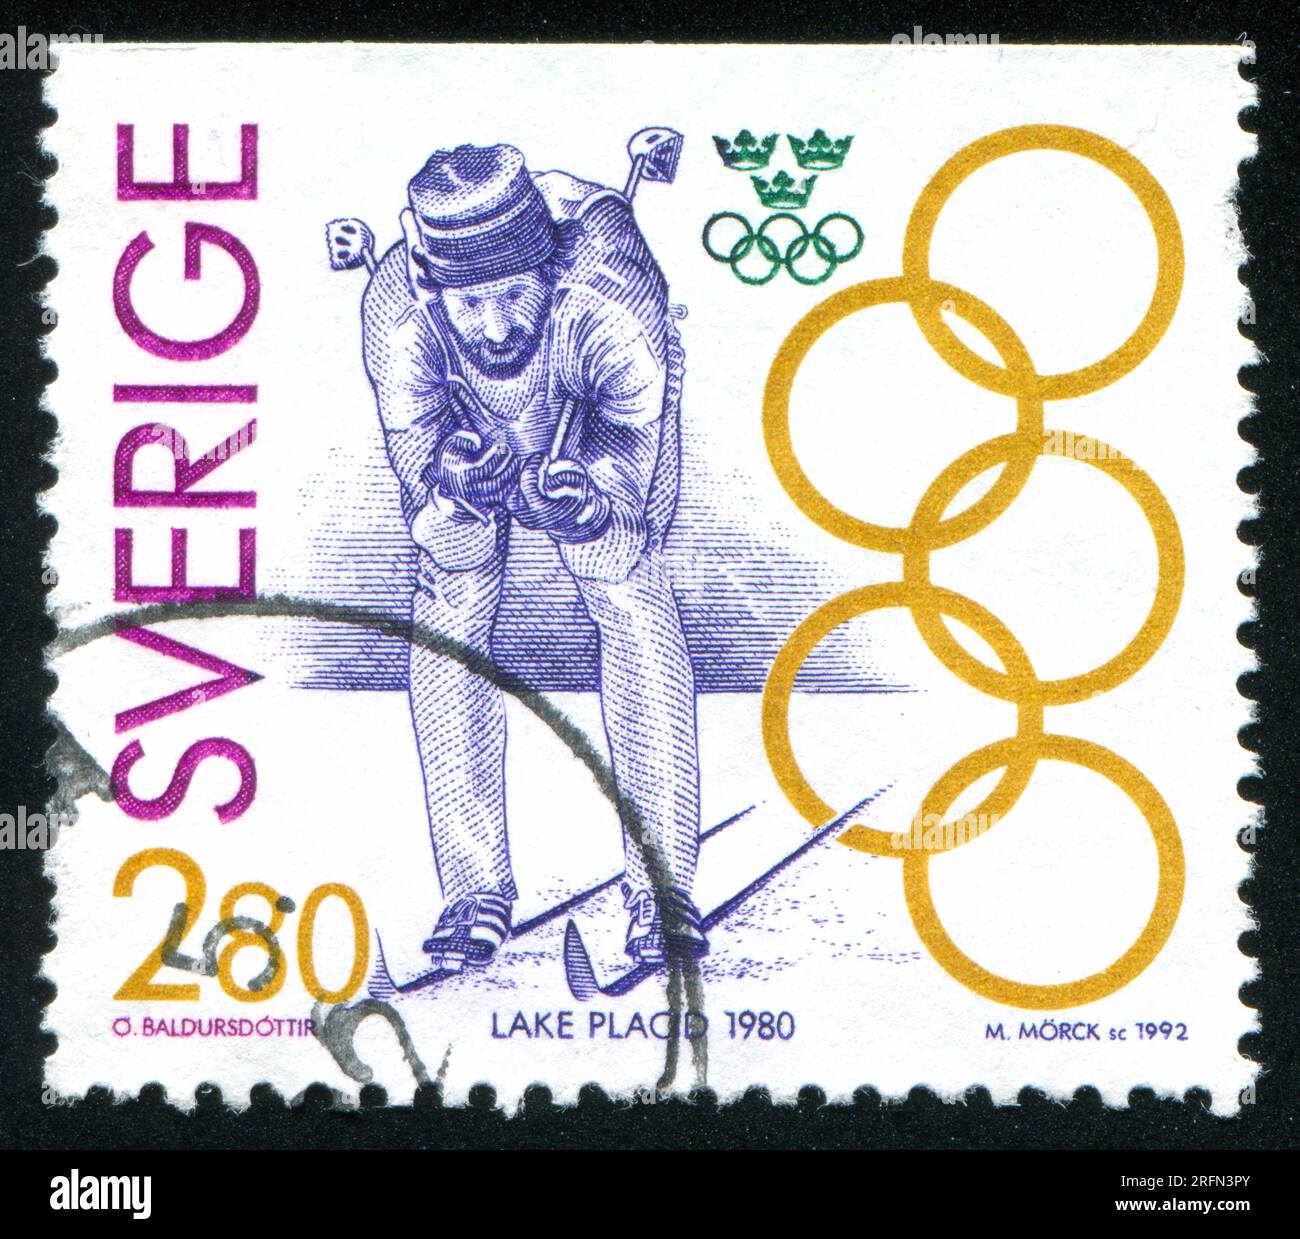 SWEDEN - CIRCA 1992: stamp printed by Sweden, shows Thomas Wassberg, cross-country skiing, Lake Placid, circa 1992 Stock Photo